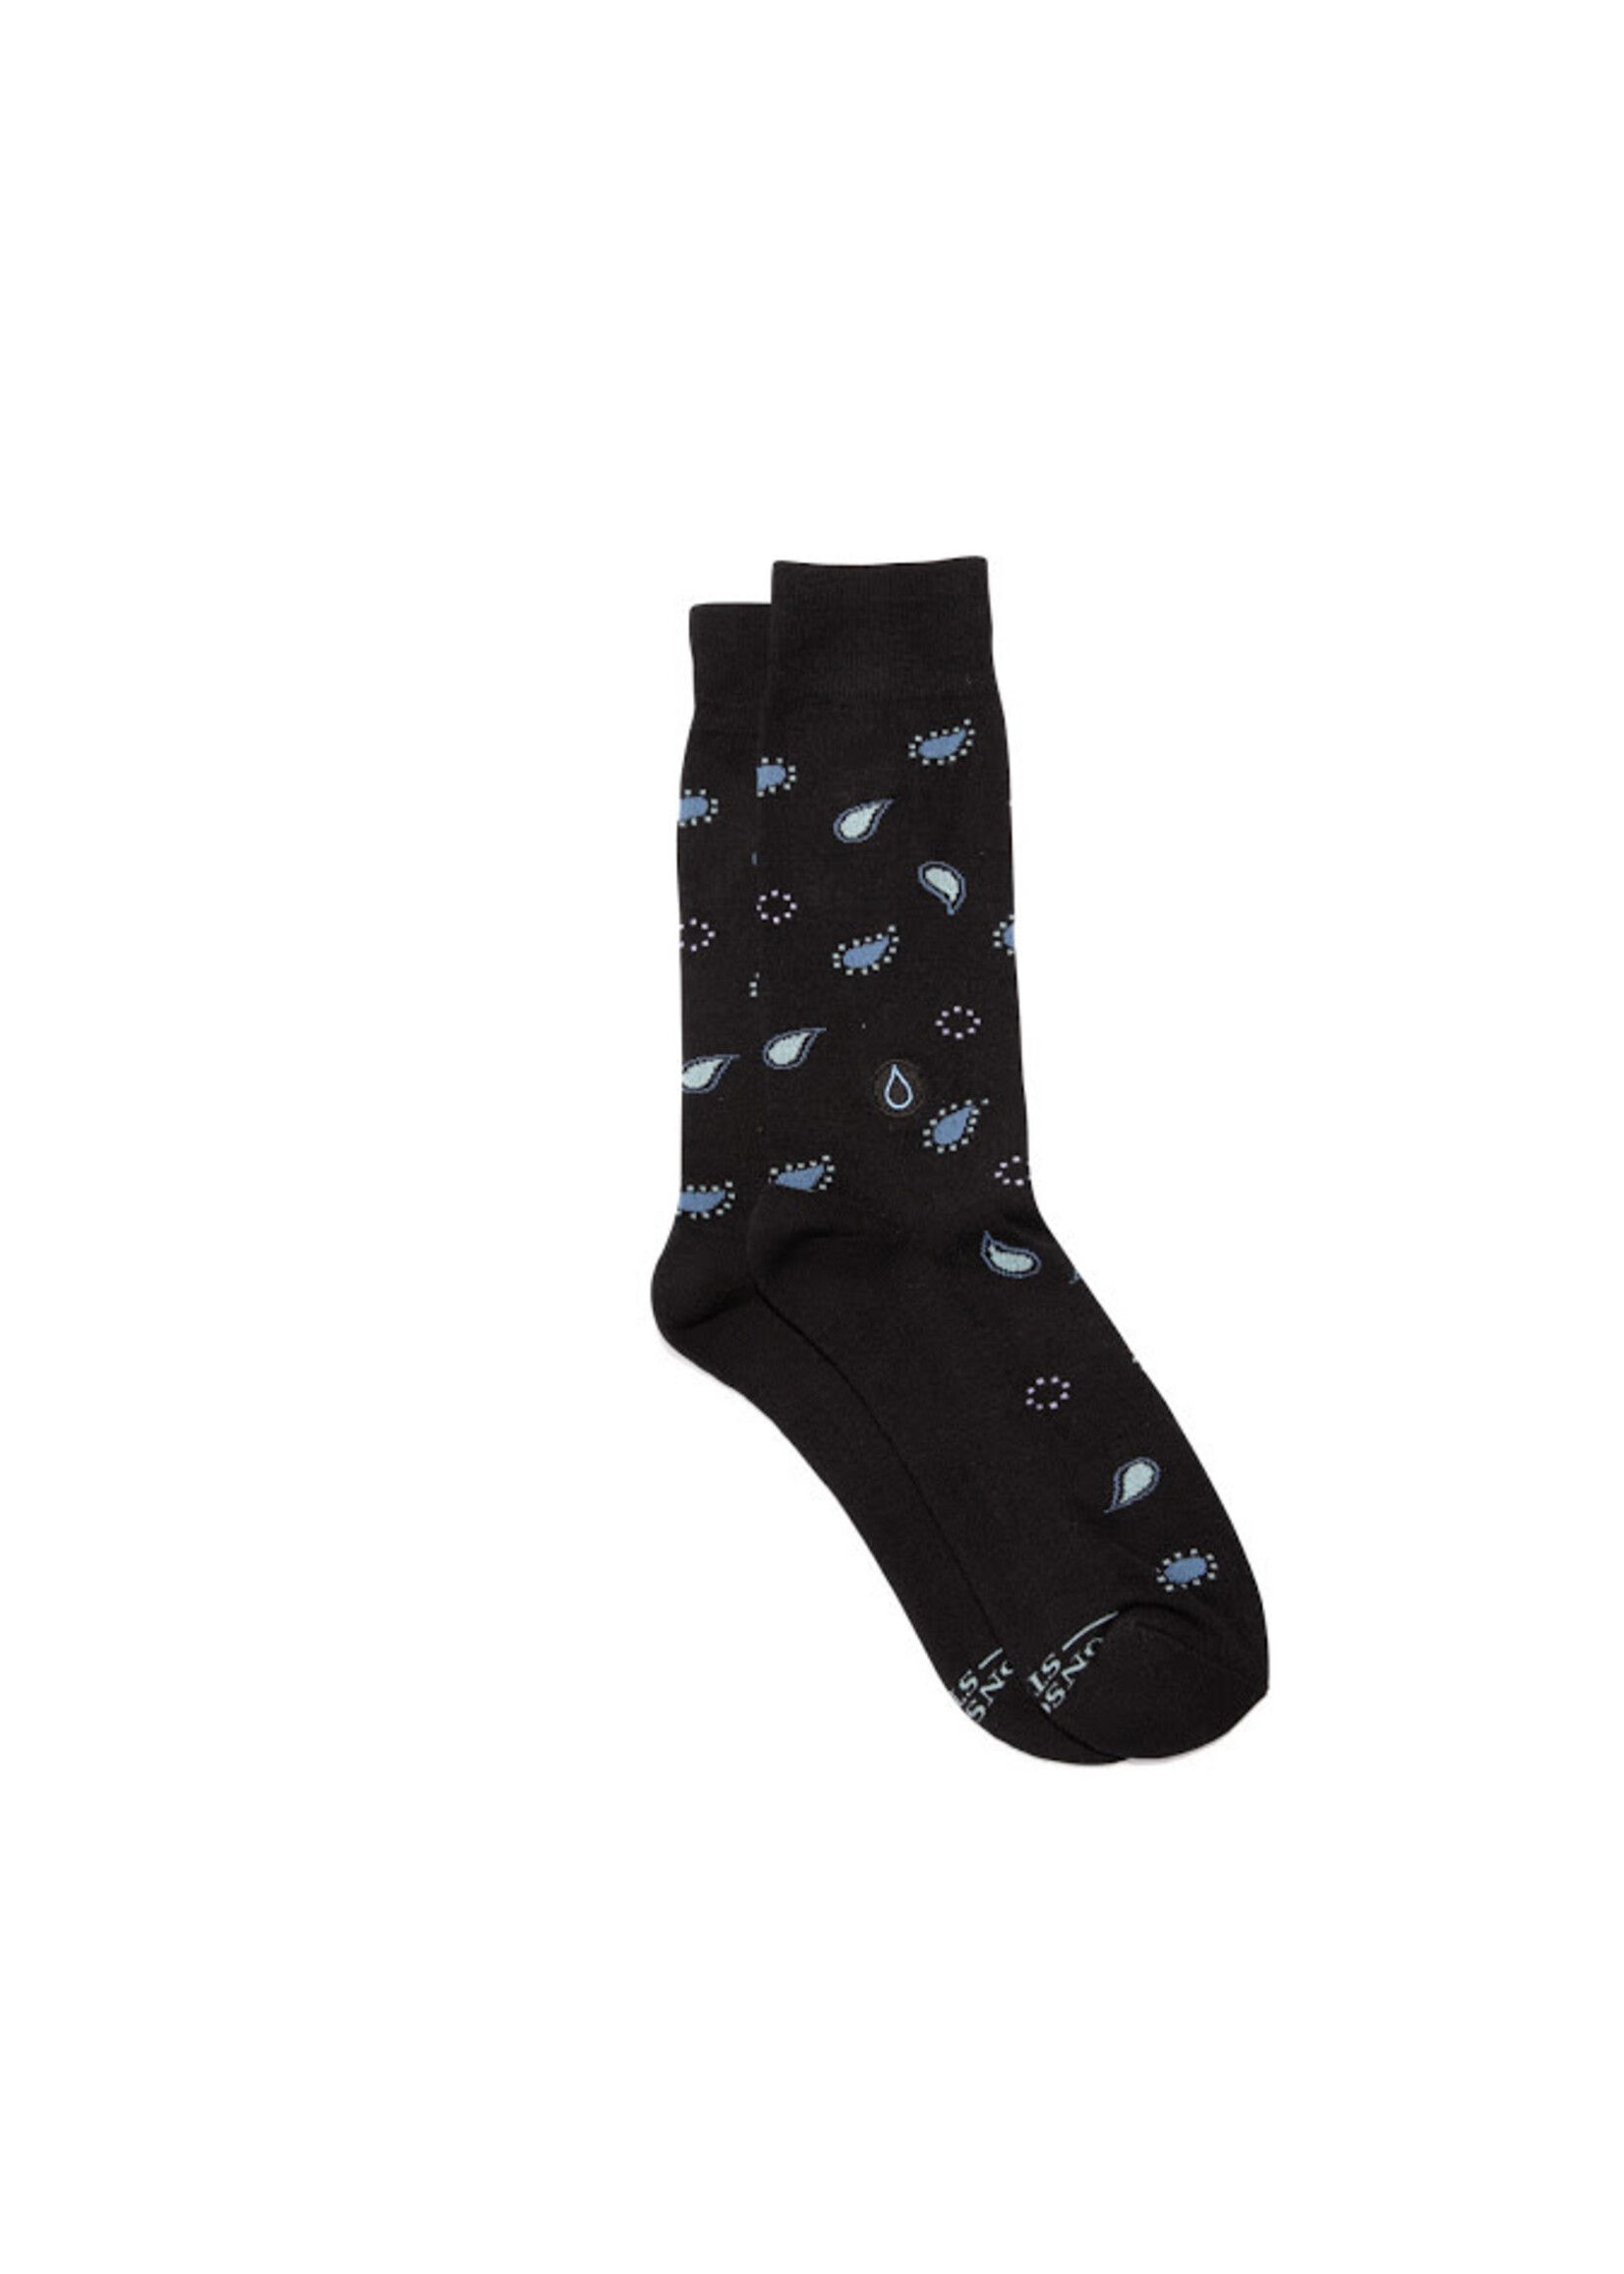 Socks that Give Water Paisley